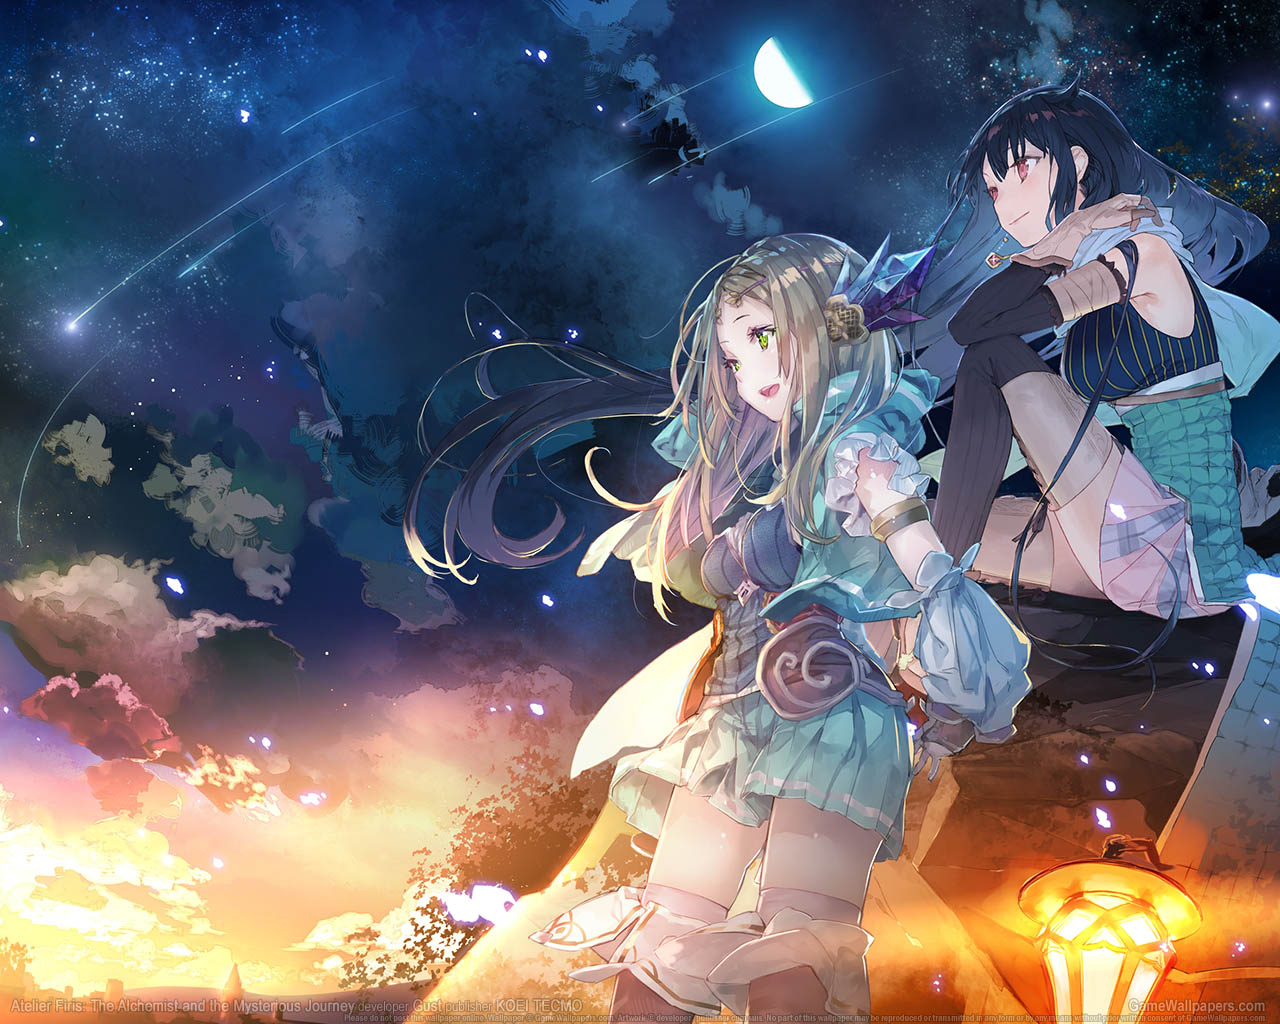 Atelier Firis: The Alchemist and the Mysterious Journeyνmmer=01 wallpaper  1280x1024